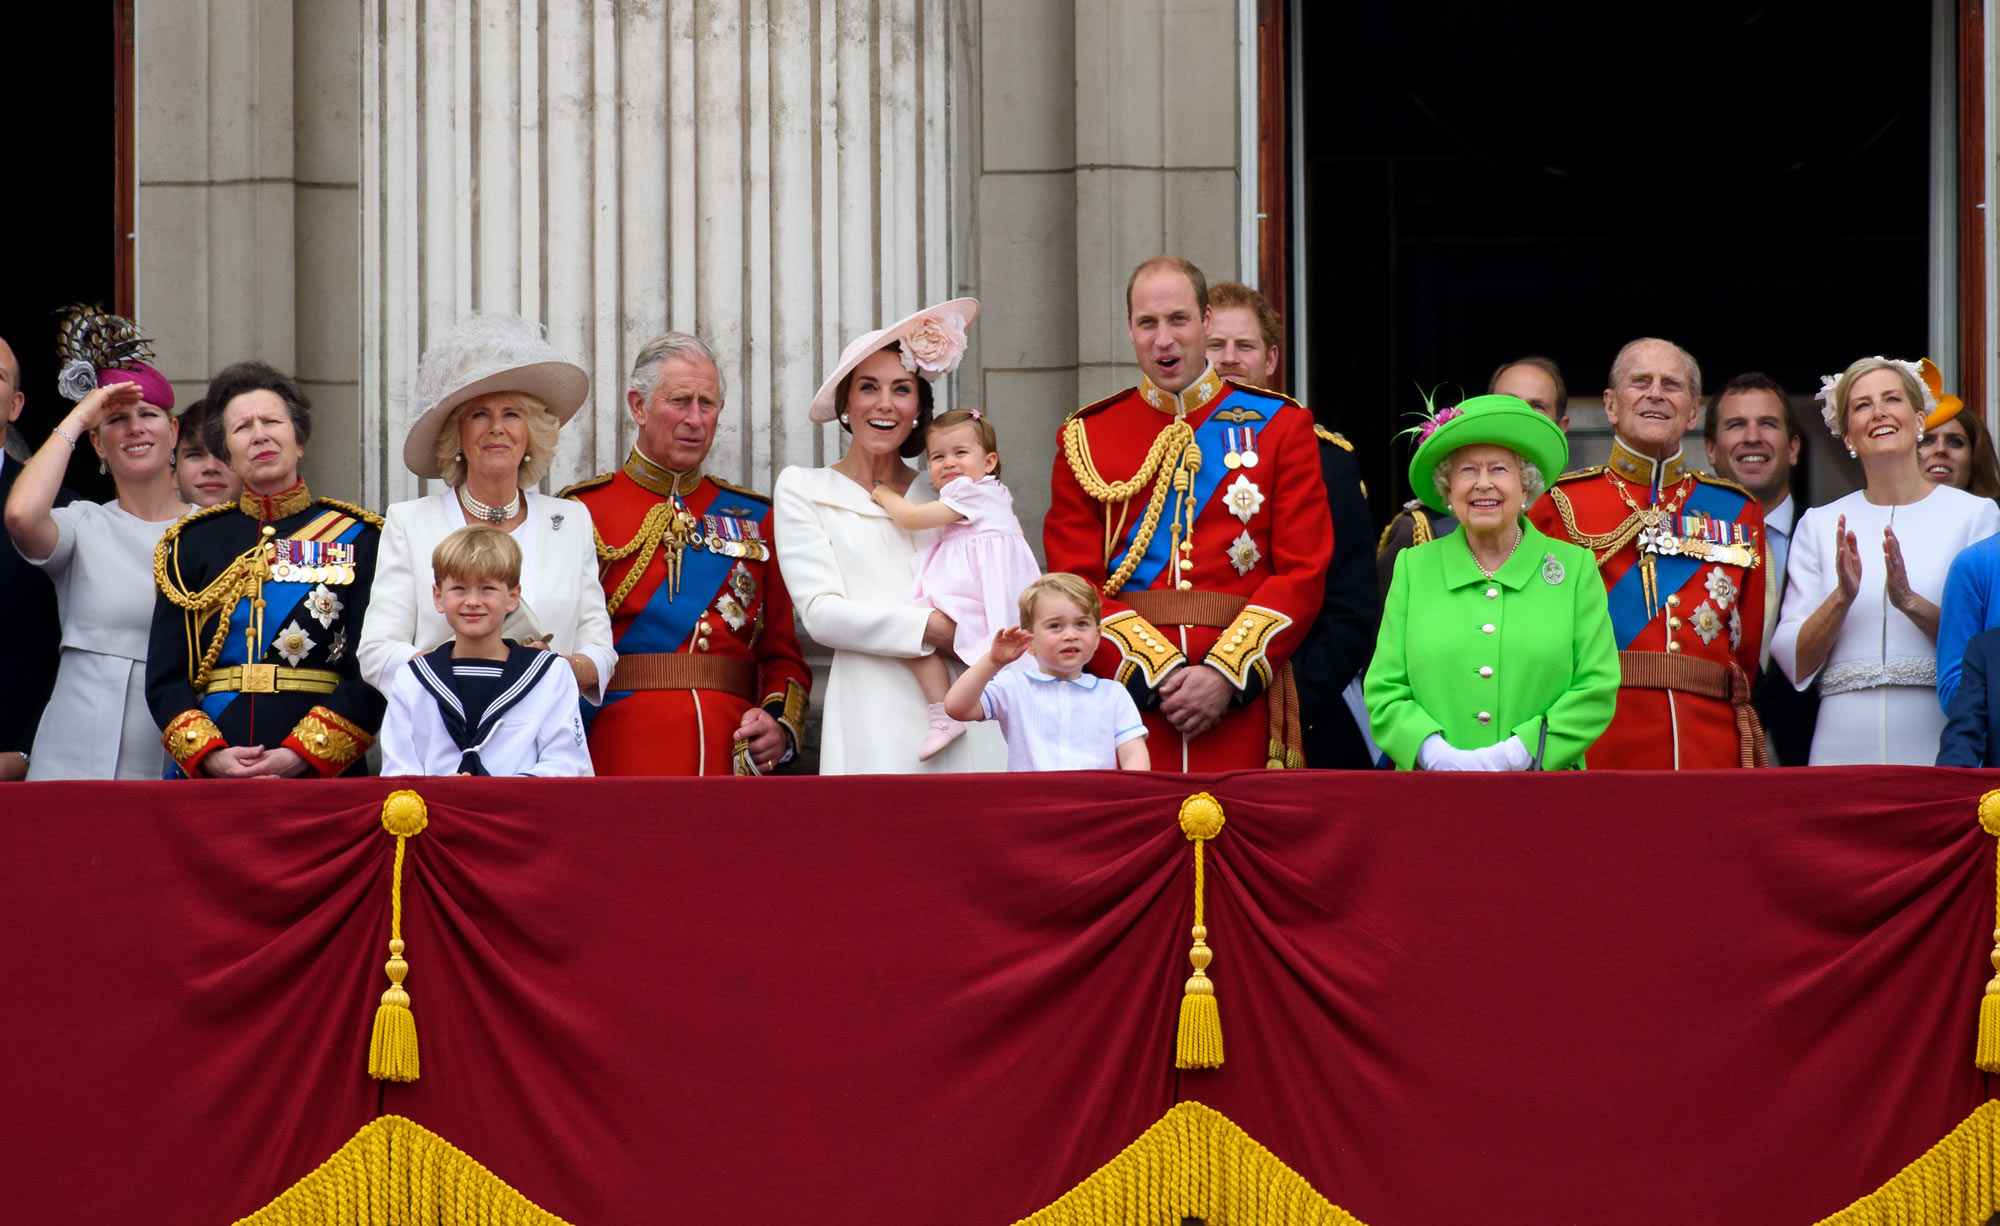 Queen Elizabeth II has a long list of family members behind her in line for the throne.